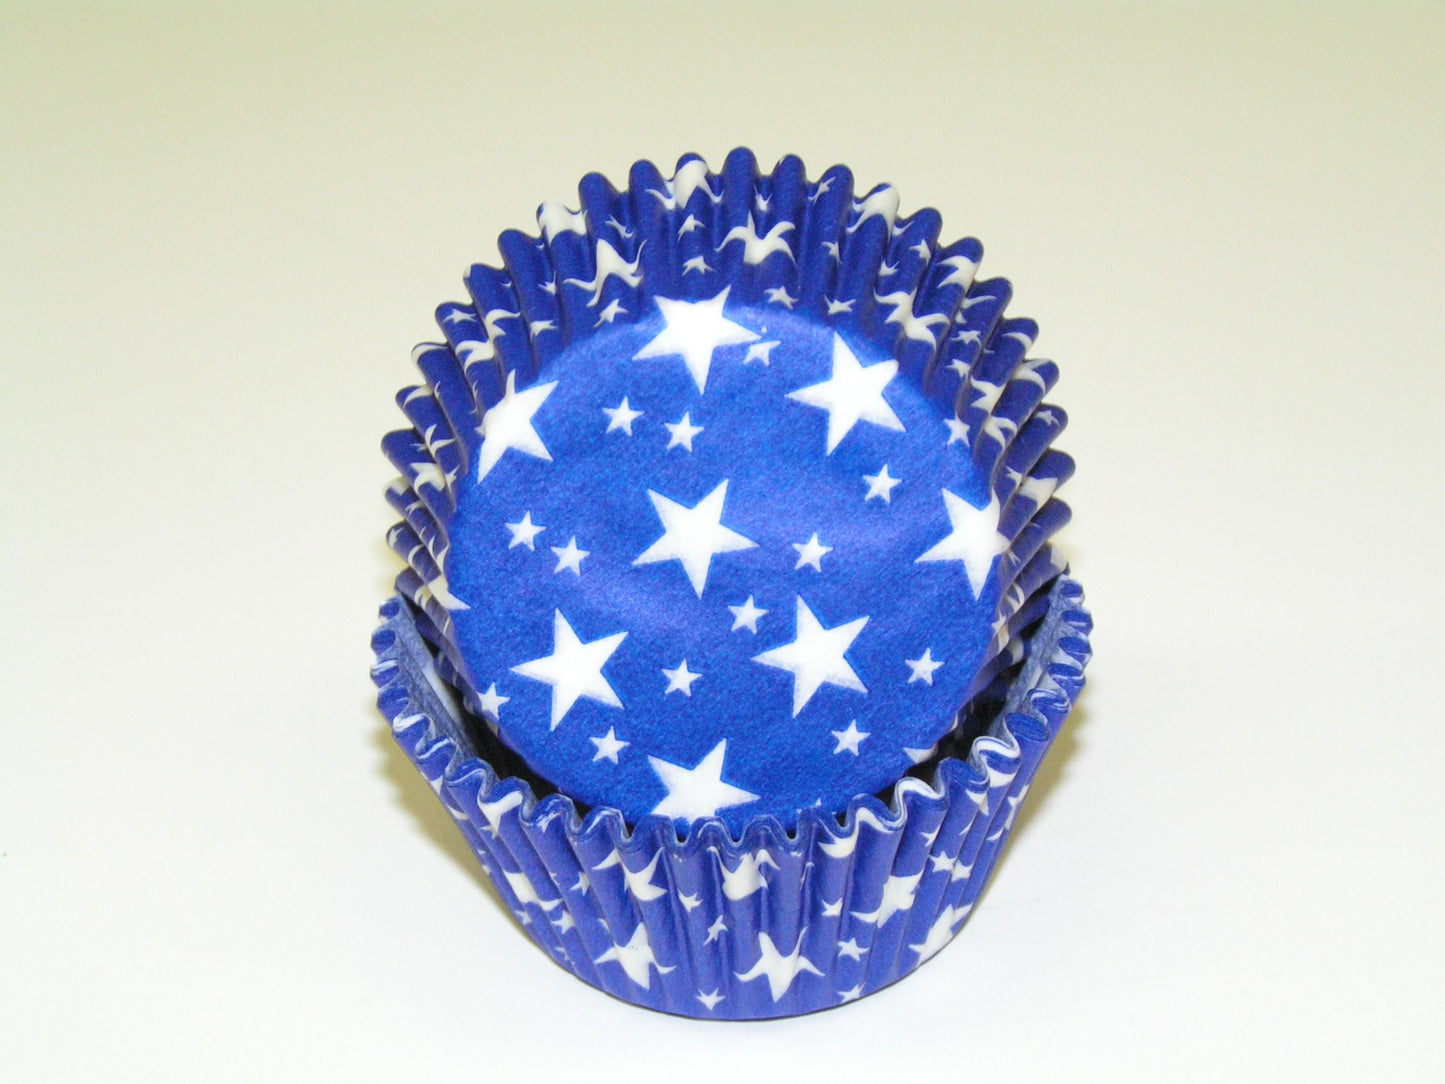 Blue with White Stars, Standard Size Bake Cups - 50ish Cupcake Liners